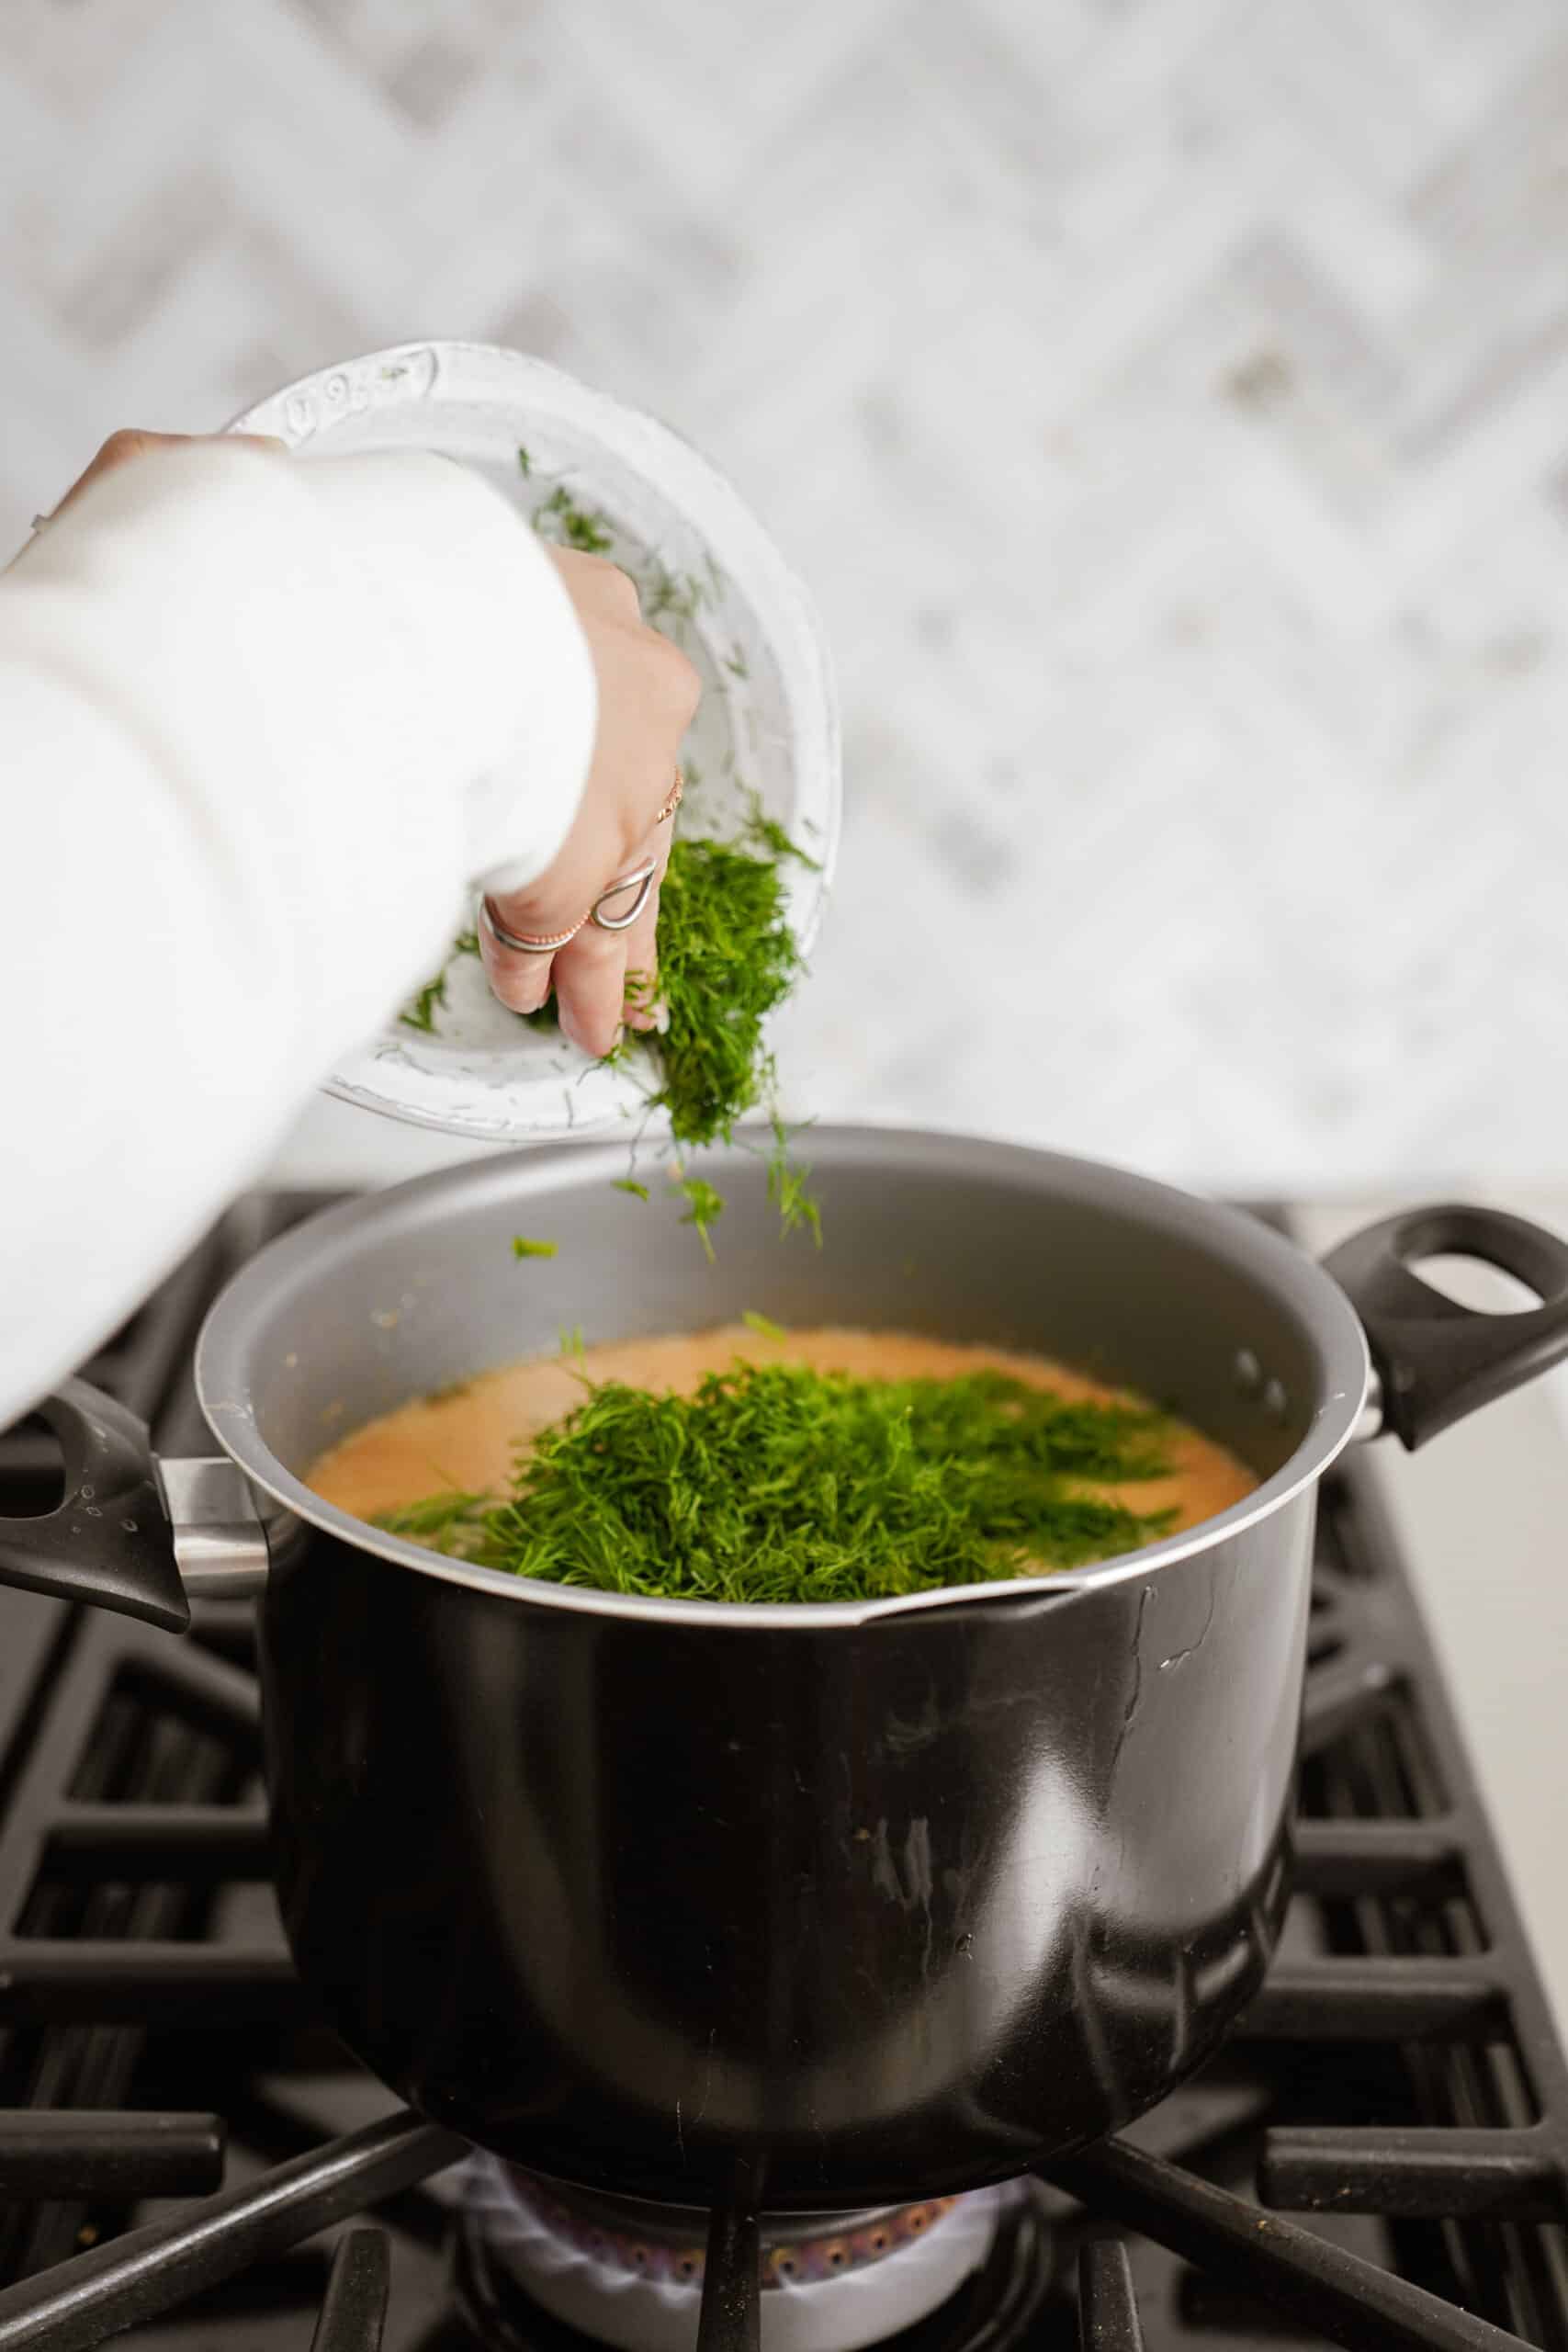 Fresh dill being added to pot on stove